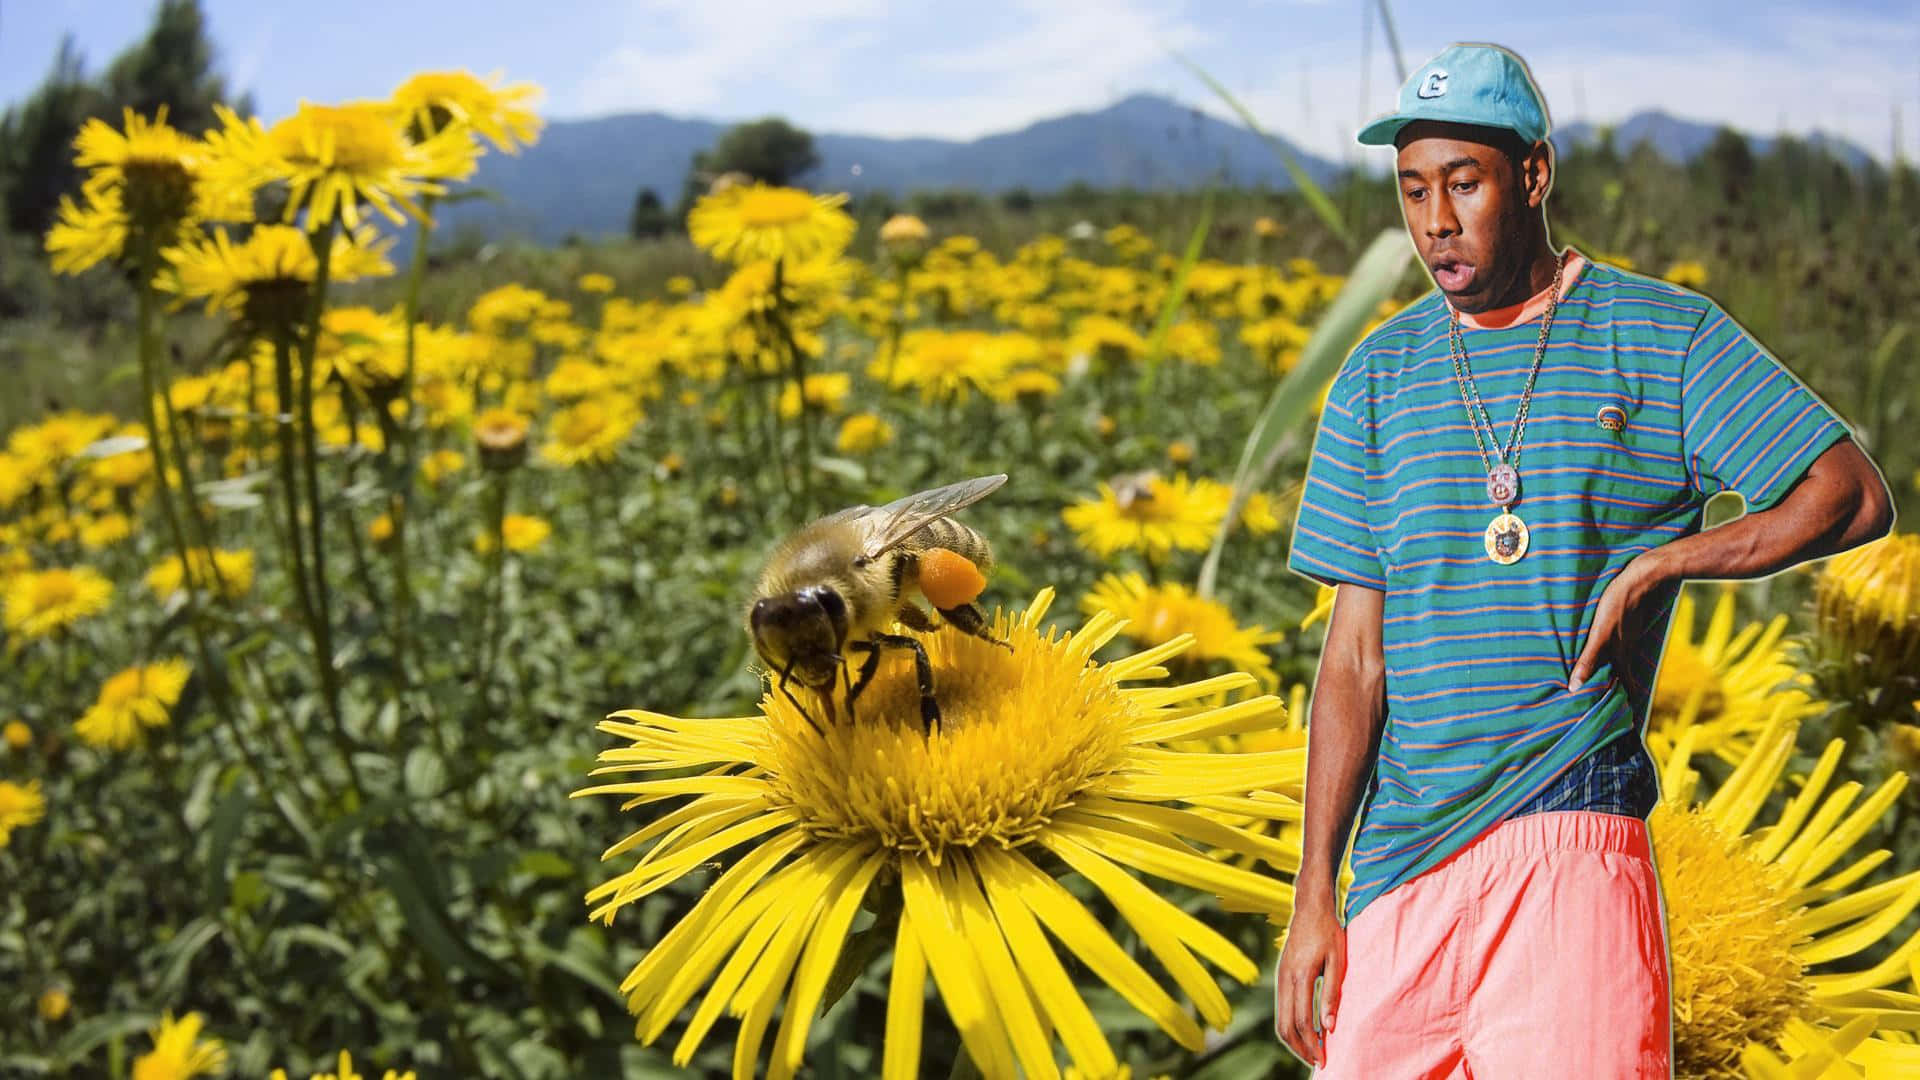 Tyler The Creator with a Thoughtful Expression